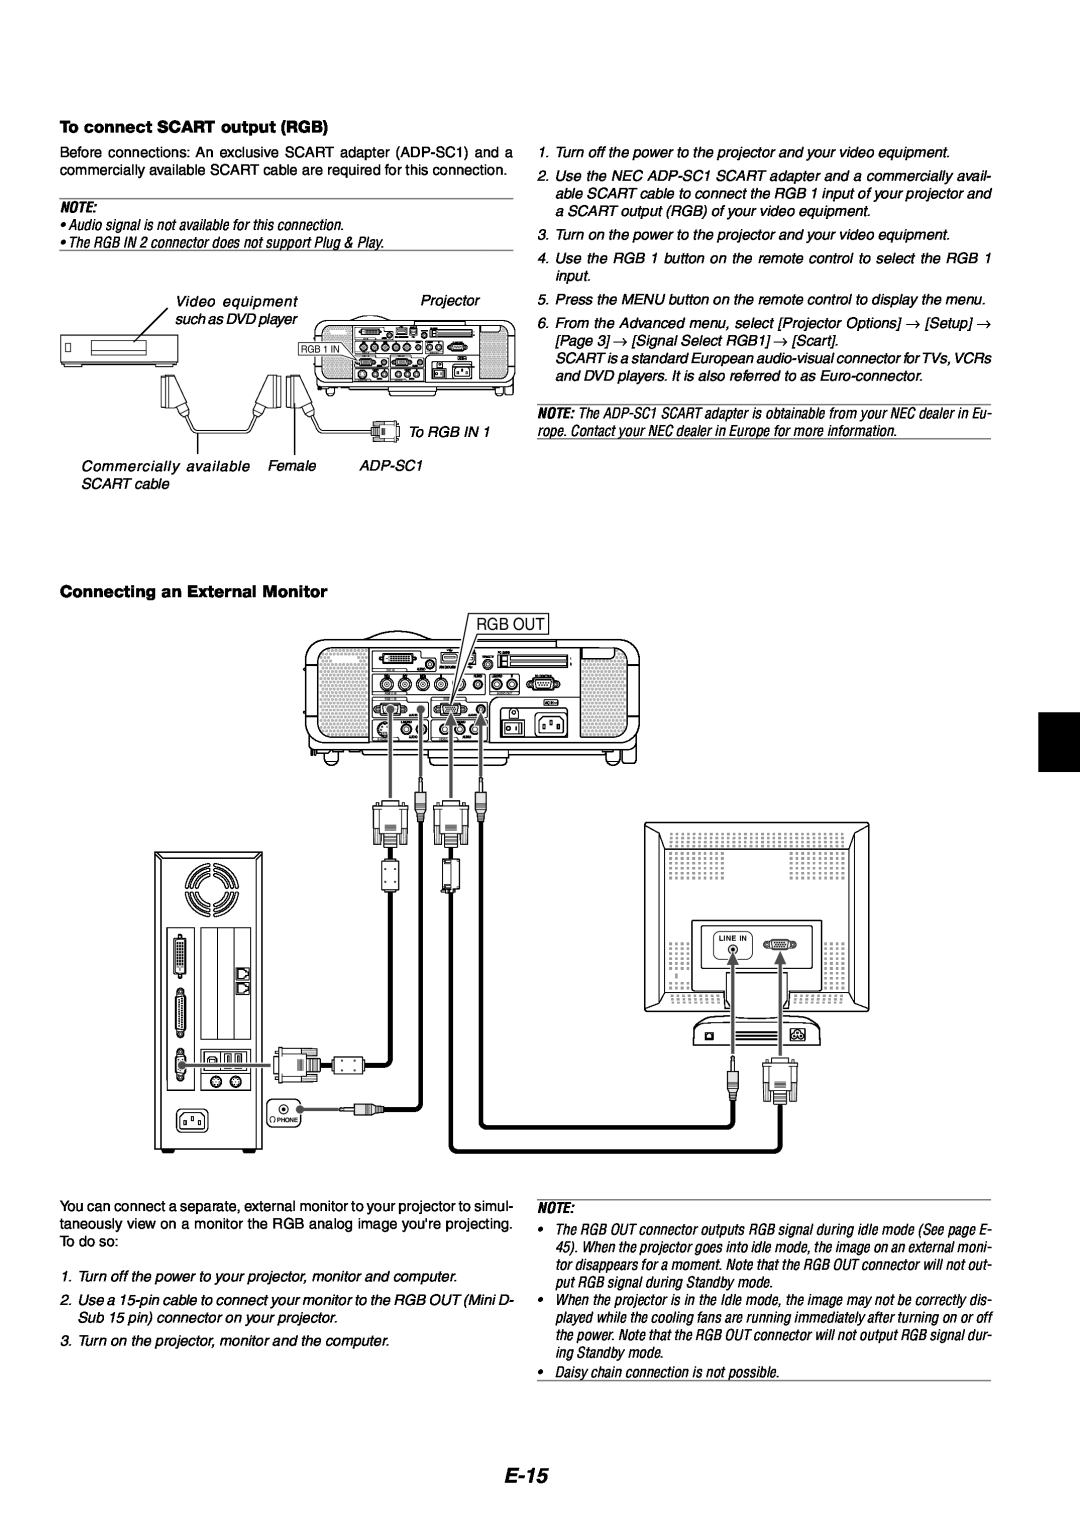 NEC MT1060 user manual E-15, To connect SCART output RGB, Connecting an External Monitor 